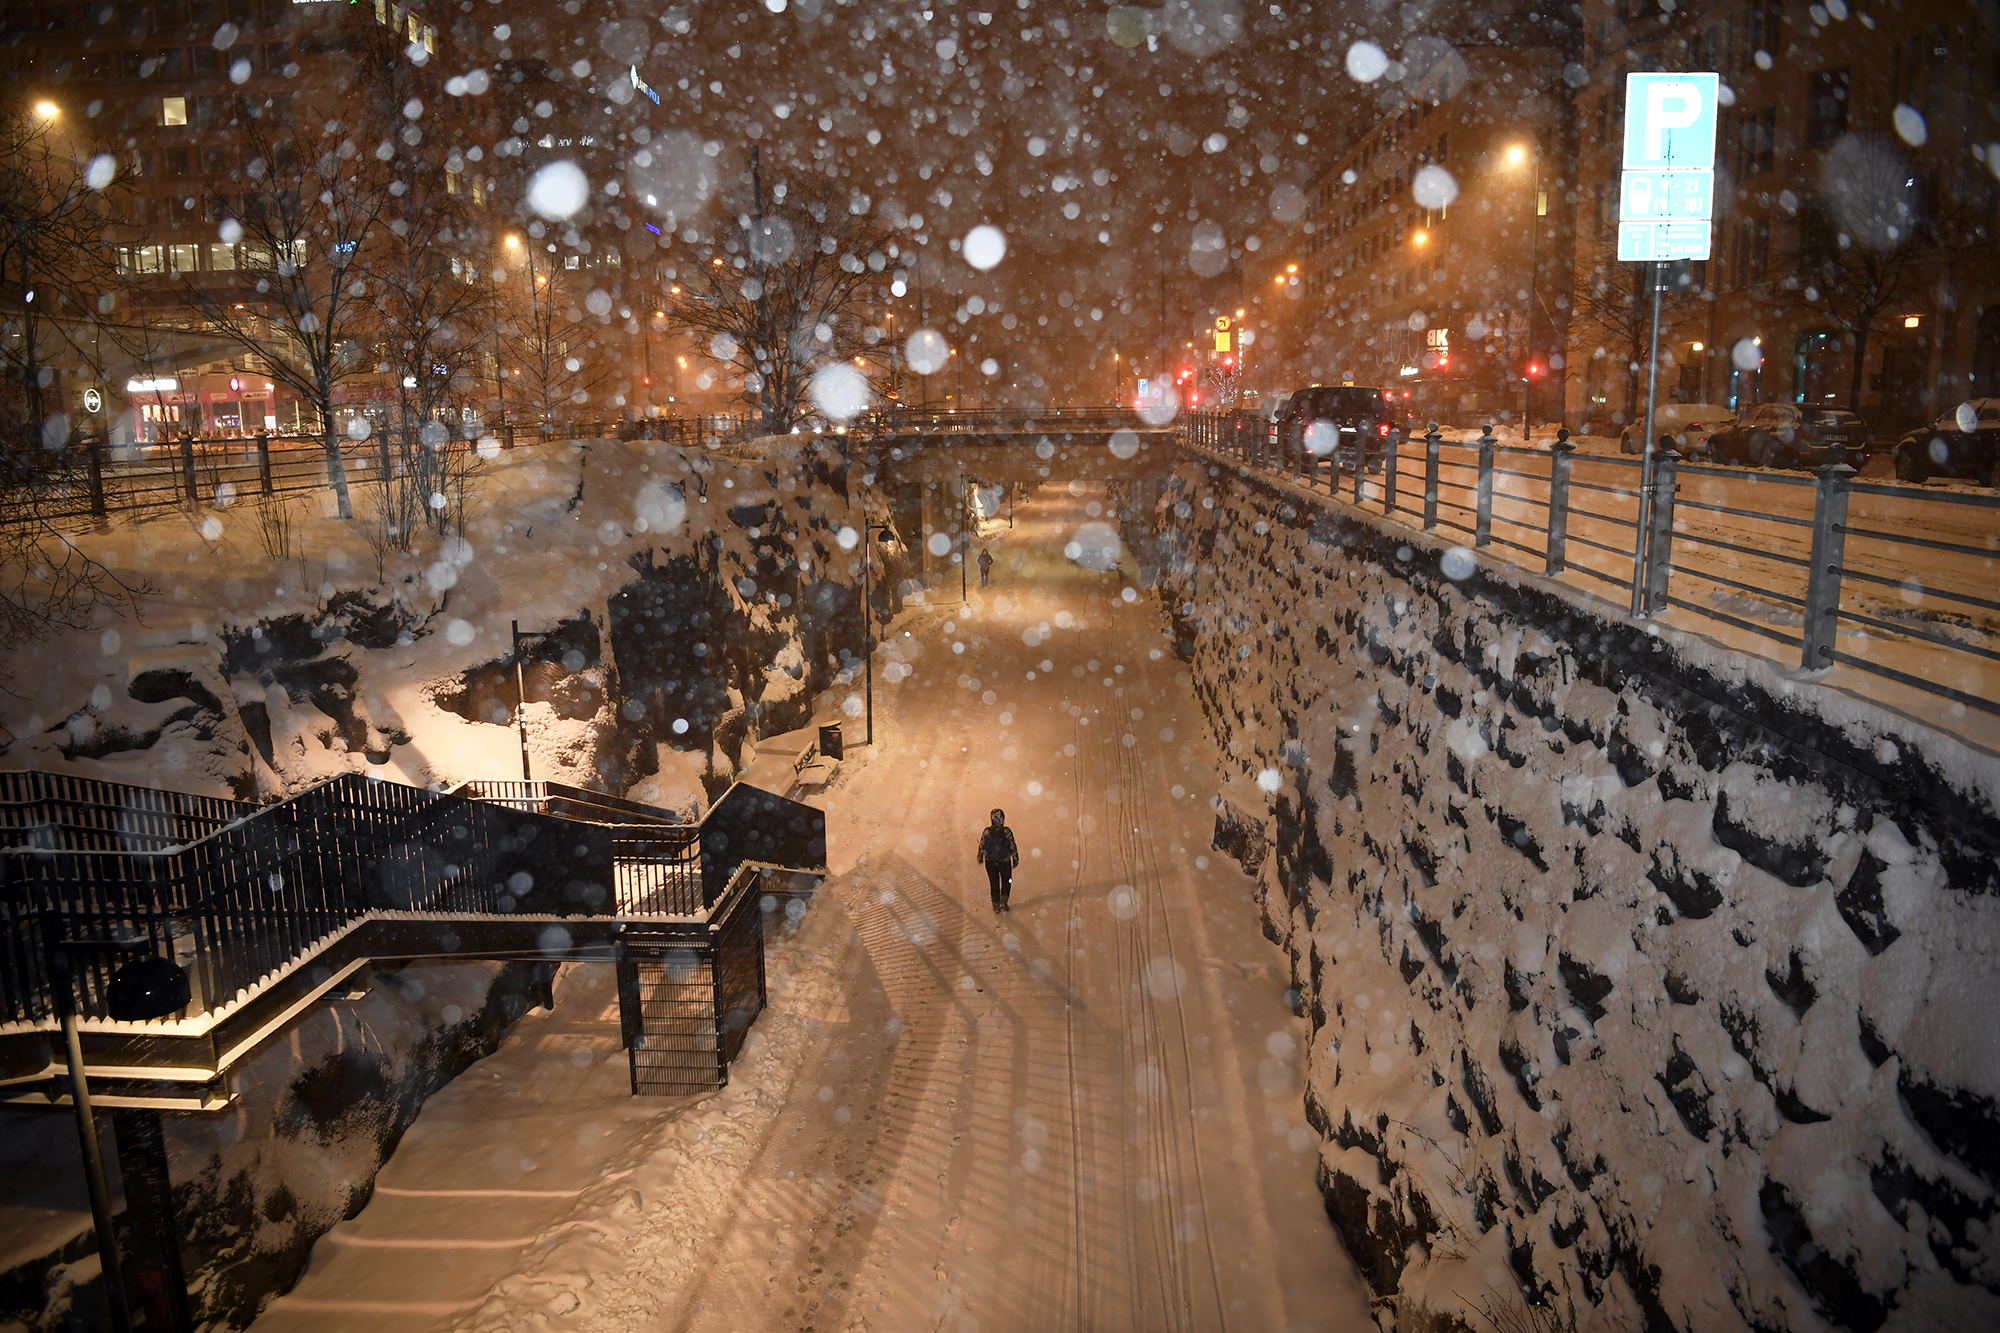 Tuesday’s Issues: Blizzard Attacks, Corona Variation Concerns, Feed the Flying Squirrels